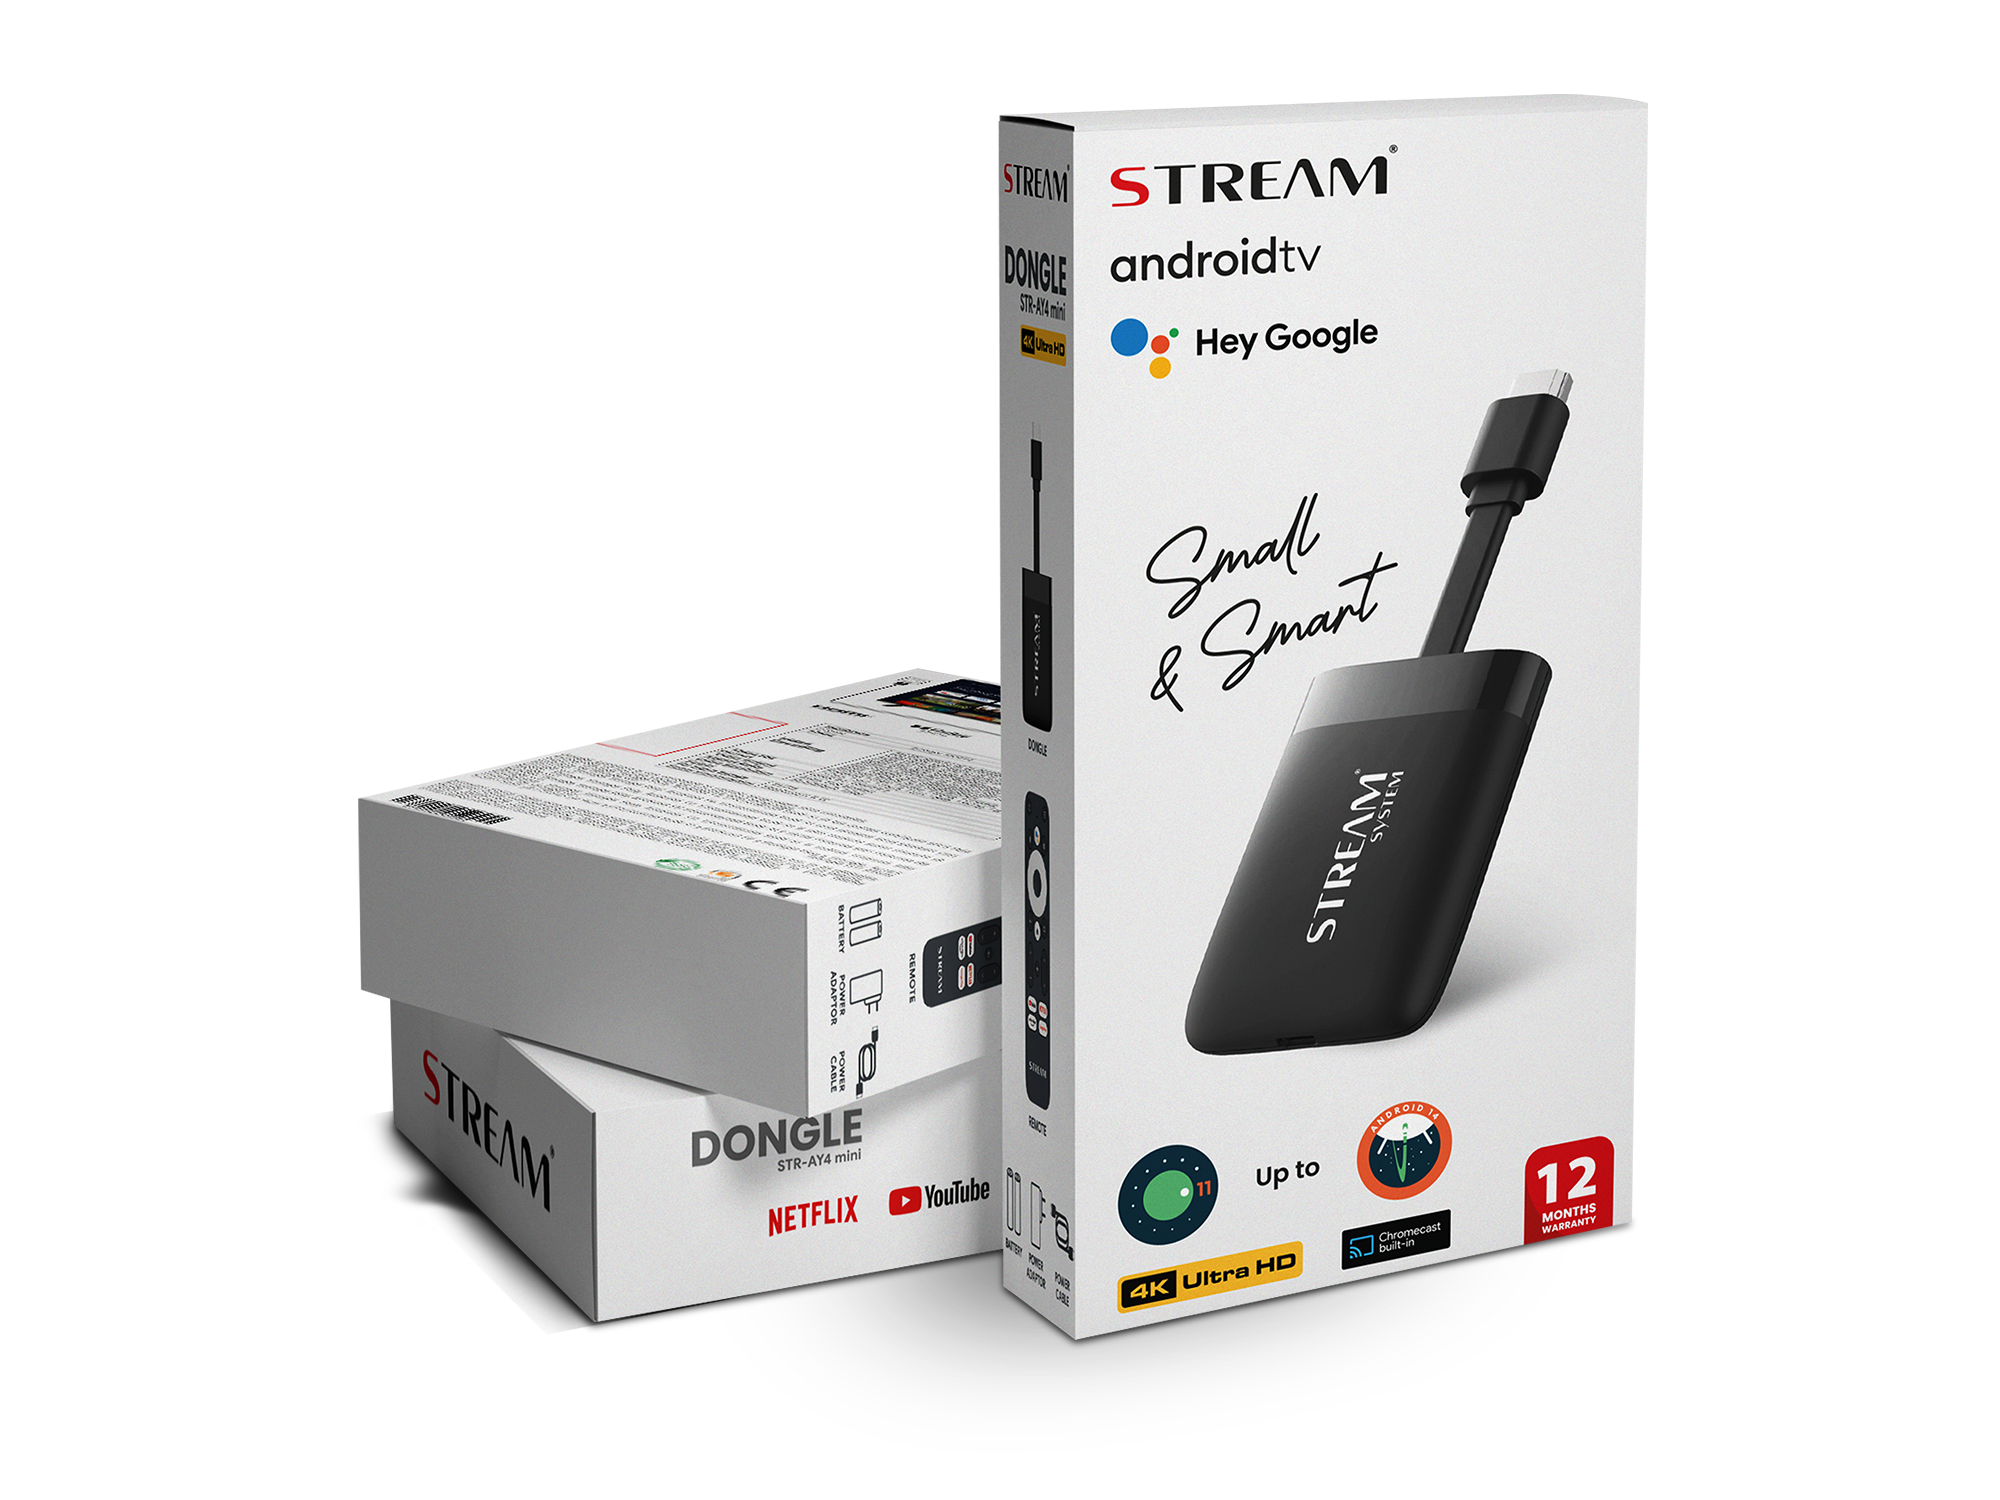 Dongle Android TV STREAM… Small and Smart !